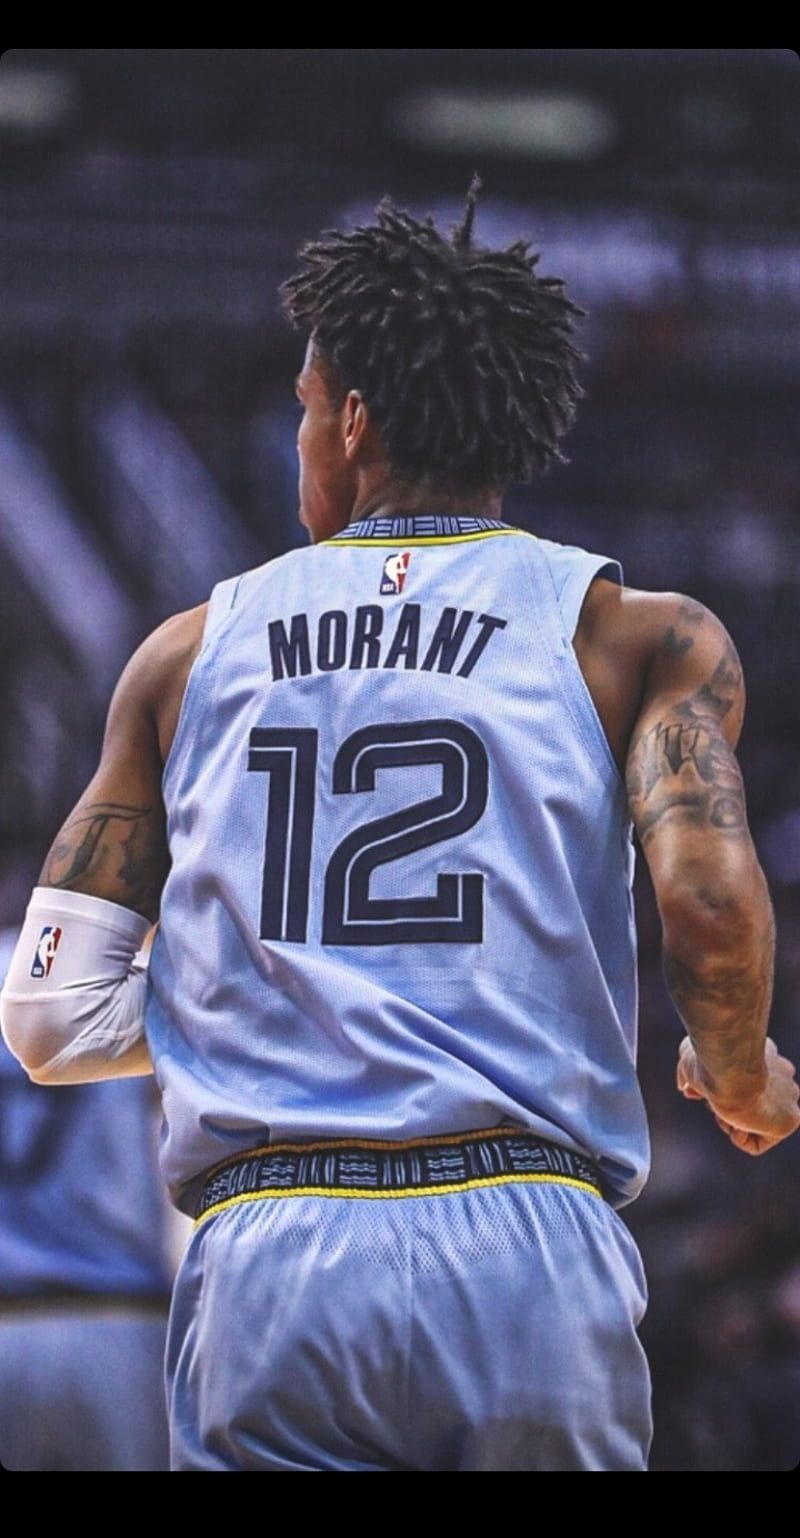 A basketball player wearing his jersey - Ja Morant